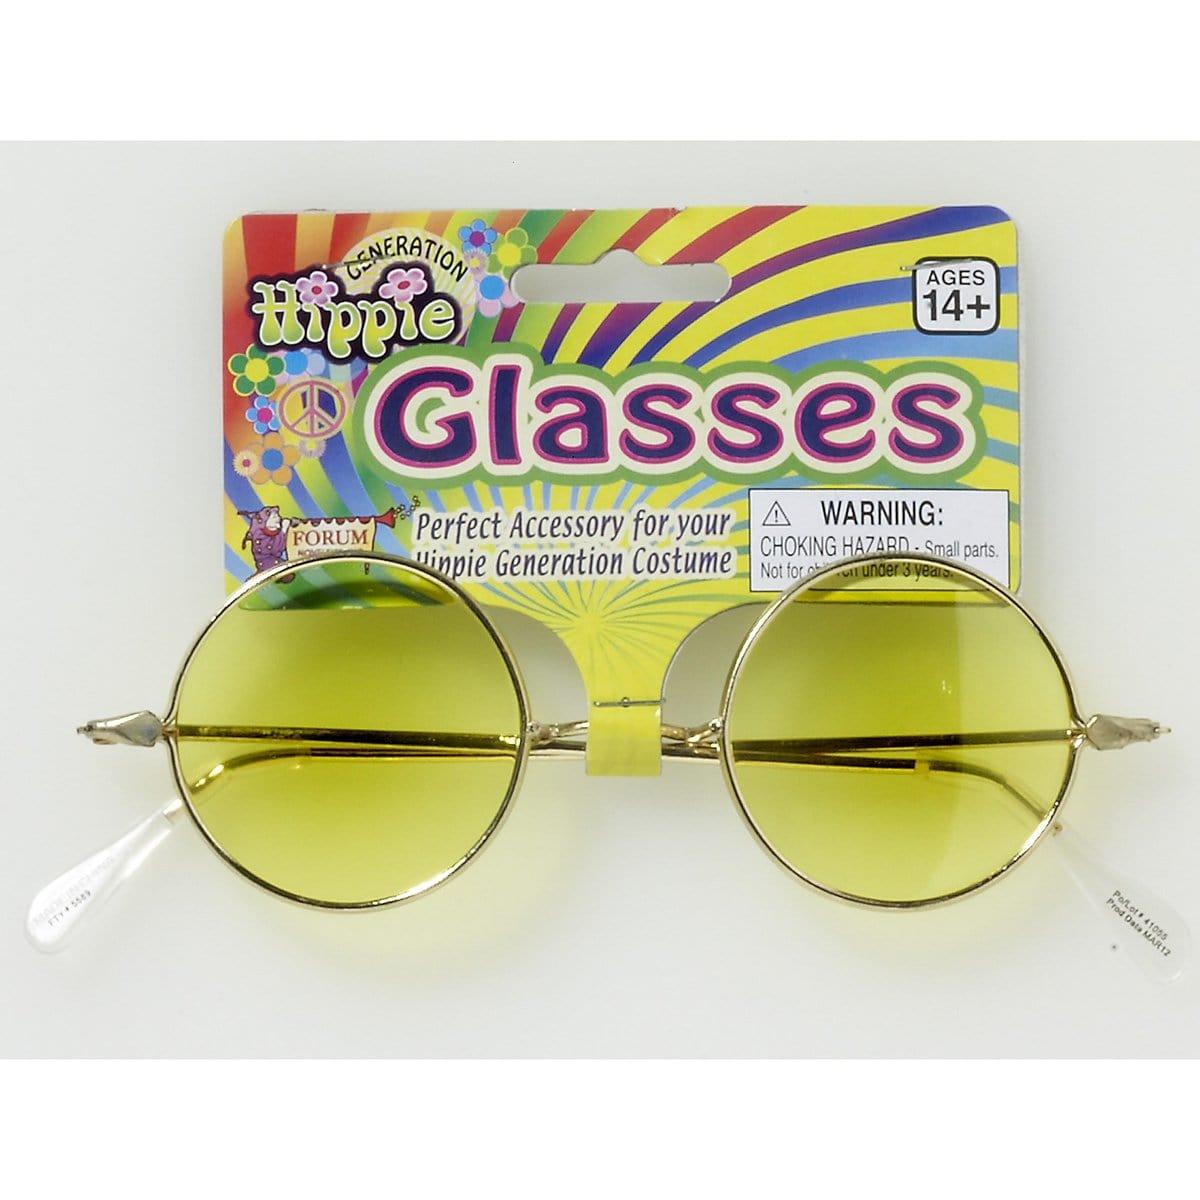 Buy Costume Accessories Hippie glasses with yellow lenses sold at Party Expert